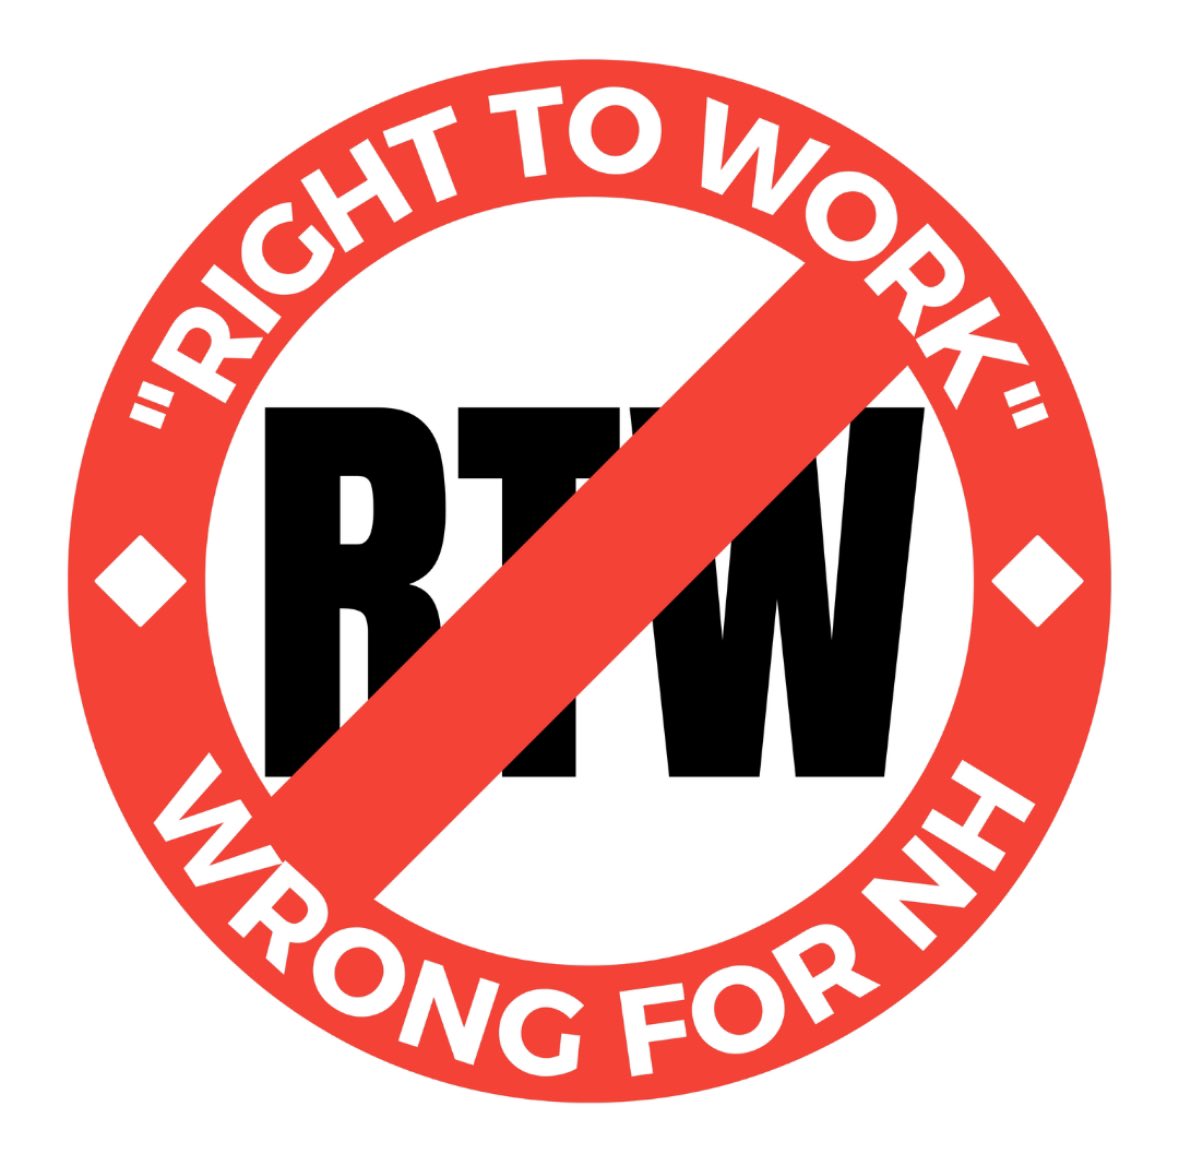 We will be standing in Solidarity together and for NH Workers, on Thursday 4/4 to let our Senators know that SB 516 (“Right-to-Work”) is WRONG for NH! #NHPolitics #1u Follow the link for more information: facebook.com/share/6h28xiuT…